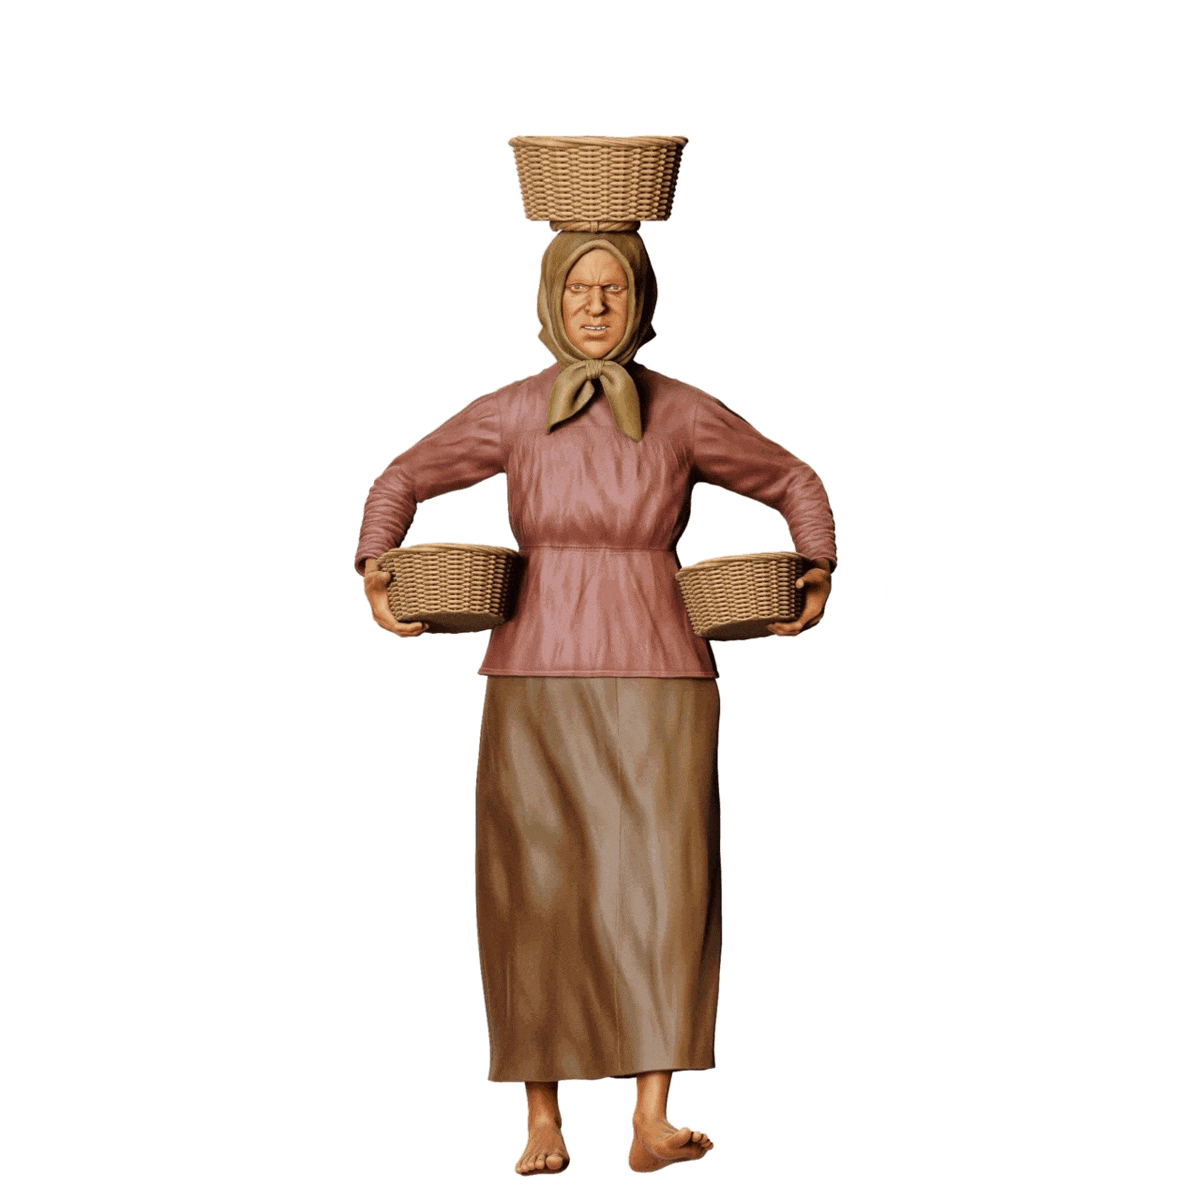 Farmer's wife with baskets - Old farmer near the Abriet (Ref. No. 303)